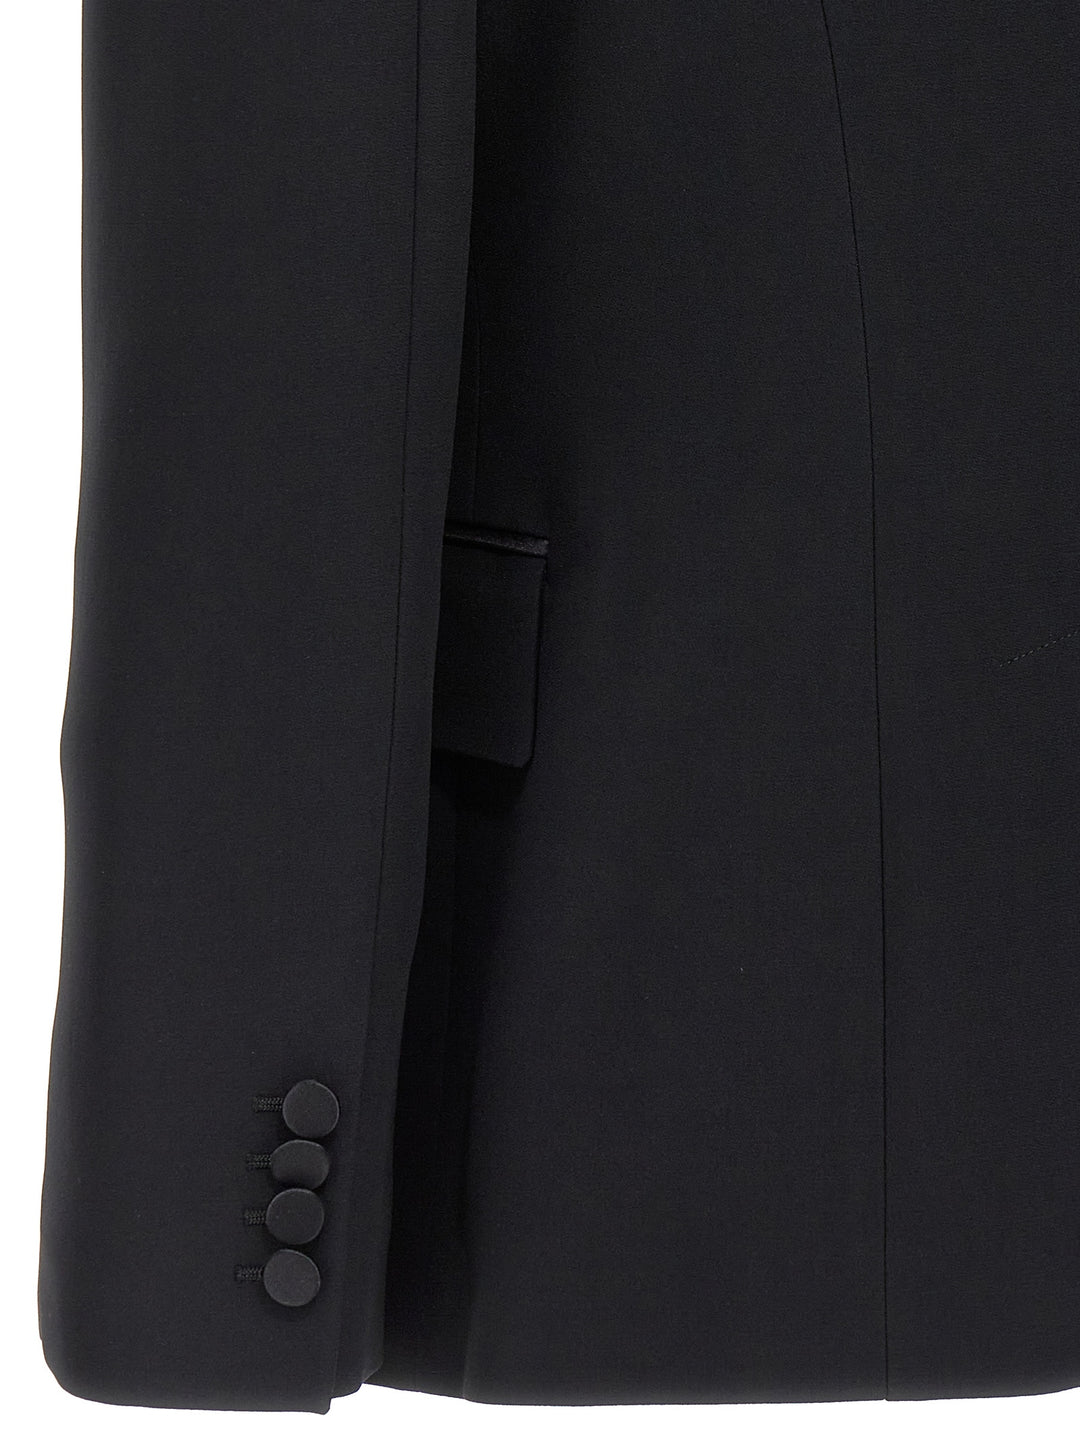 Double-Breasted Blazer With Satin Details Giacche Nero